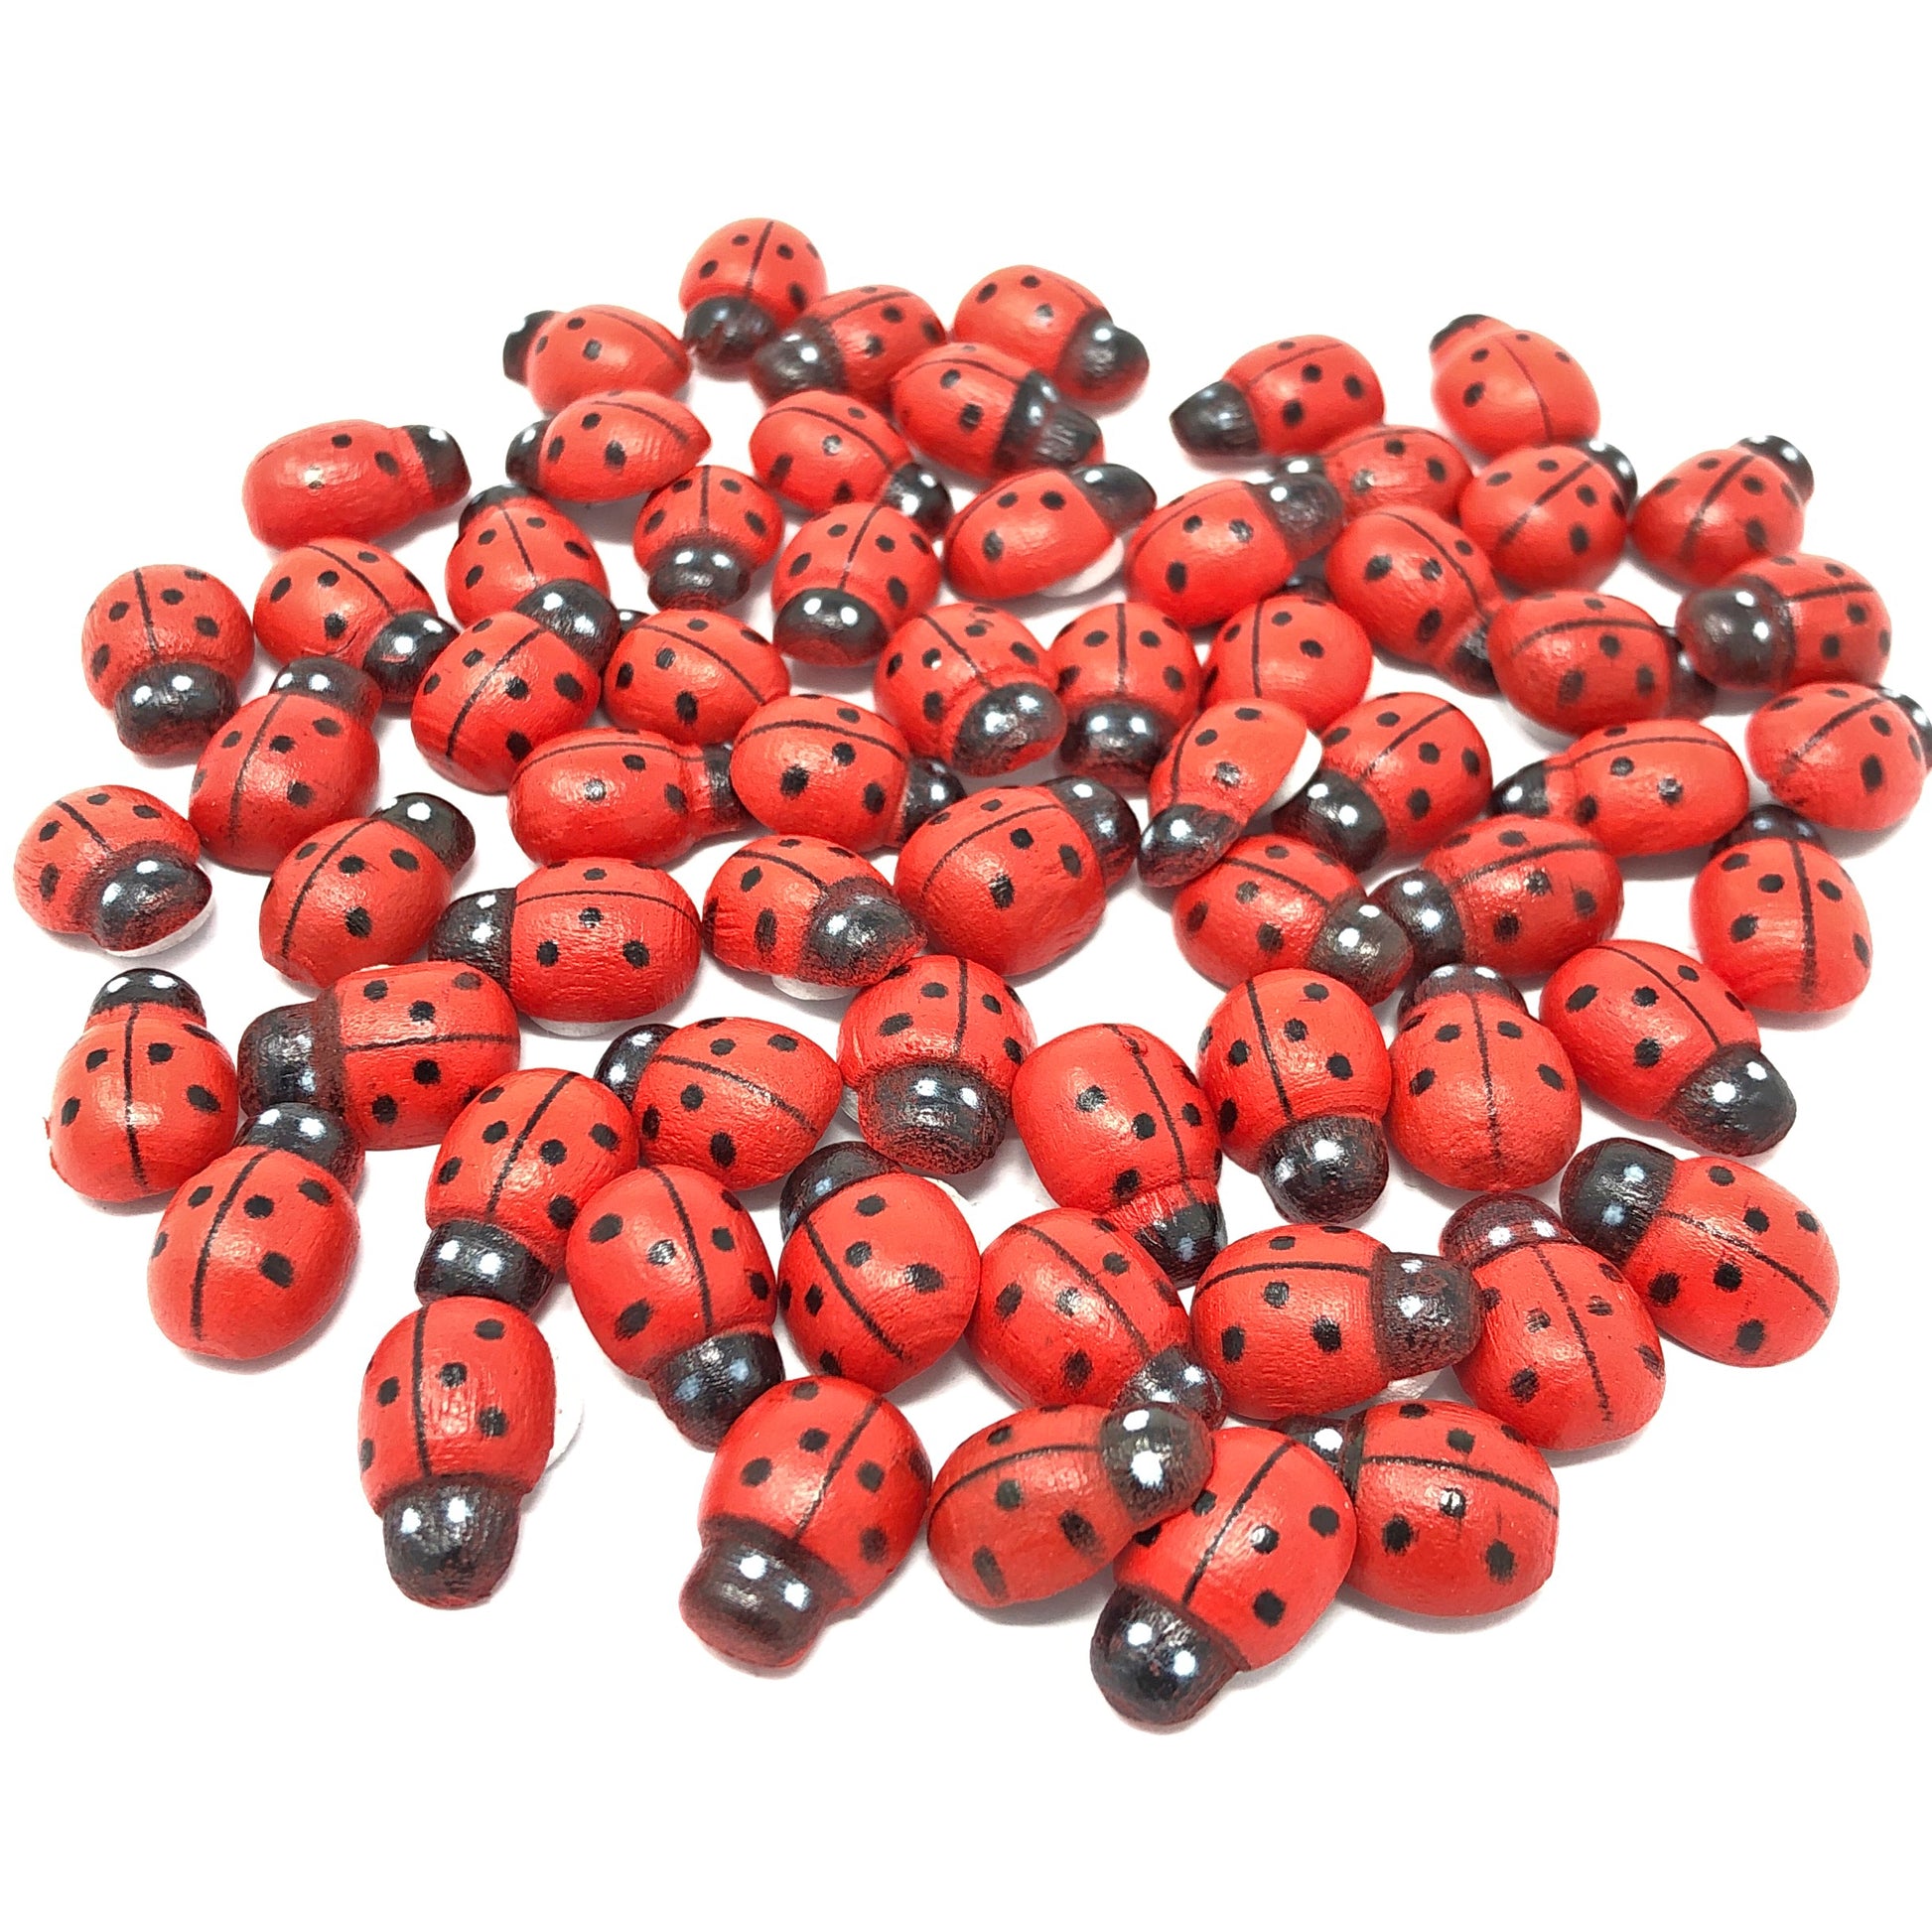 Red Mini 9x12mm Ladybirds Self Adhesive Wooden Ladybug Wood Toppers